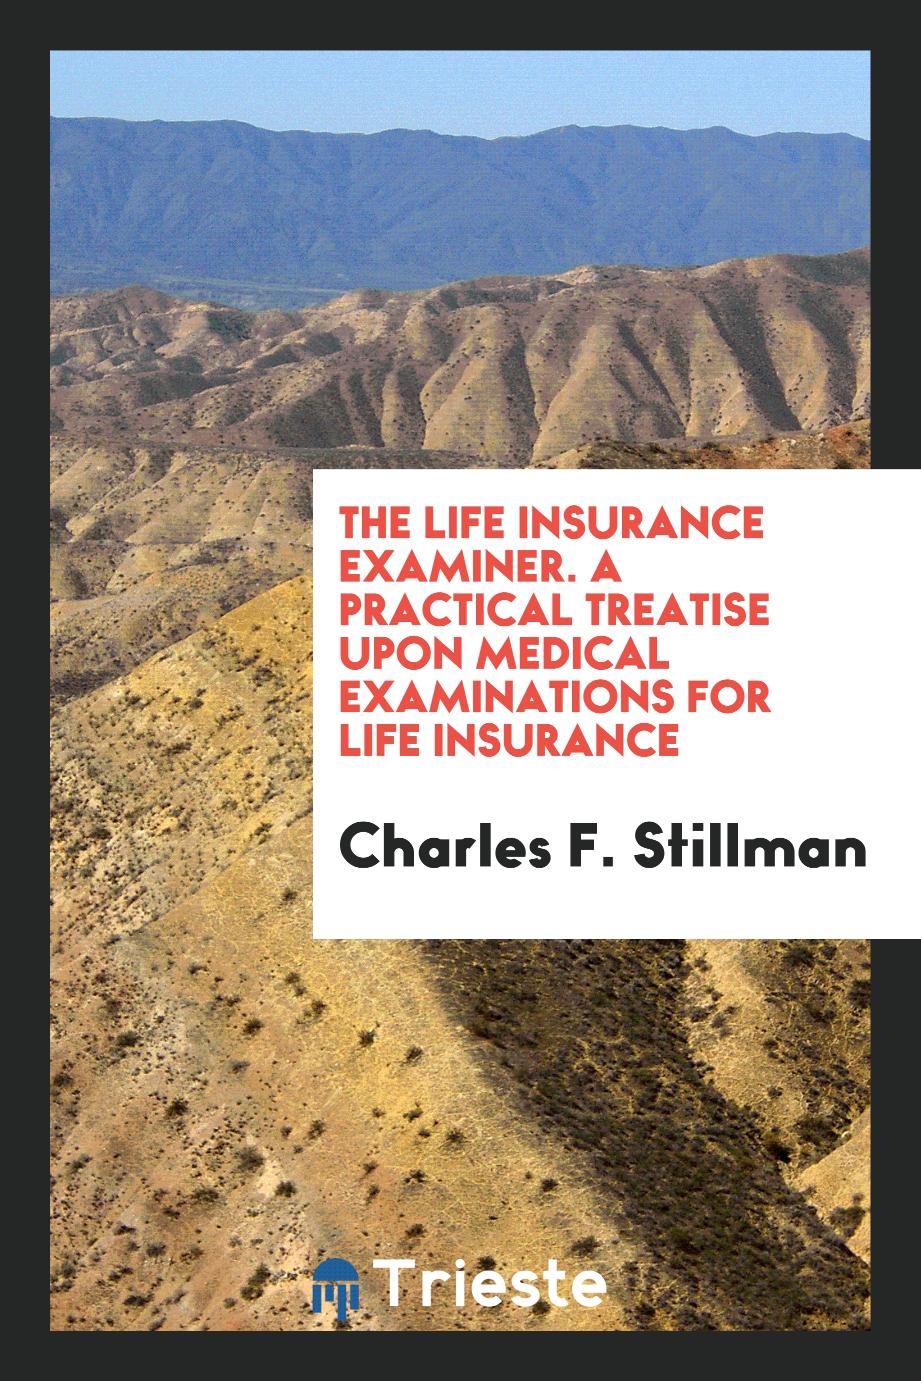 The Life Insurance Examiner. A Practical Treatise upon Medical Examinations for Life Insurance